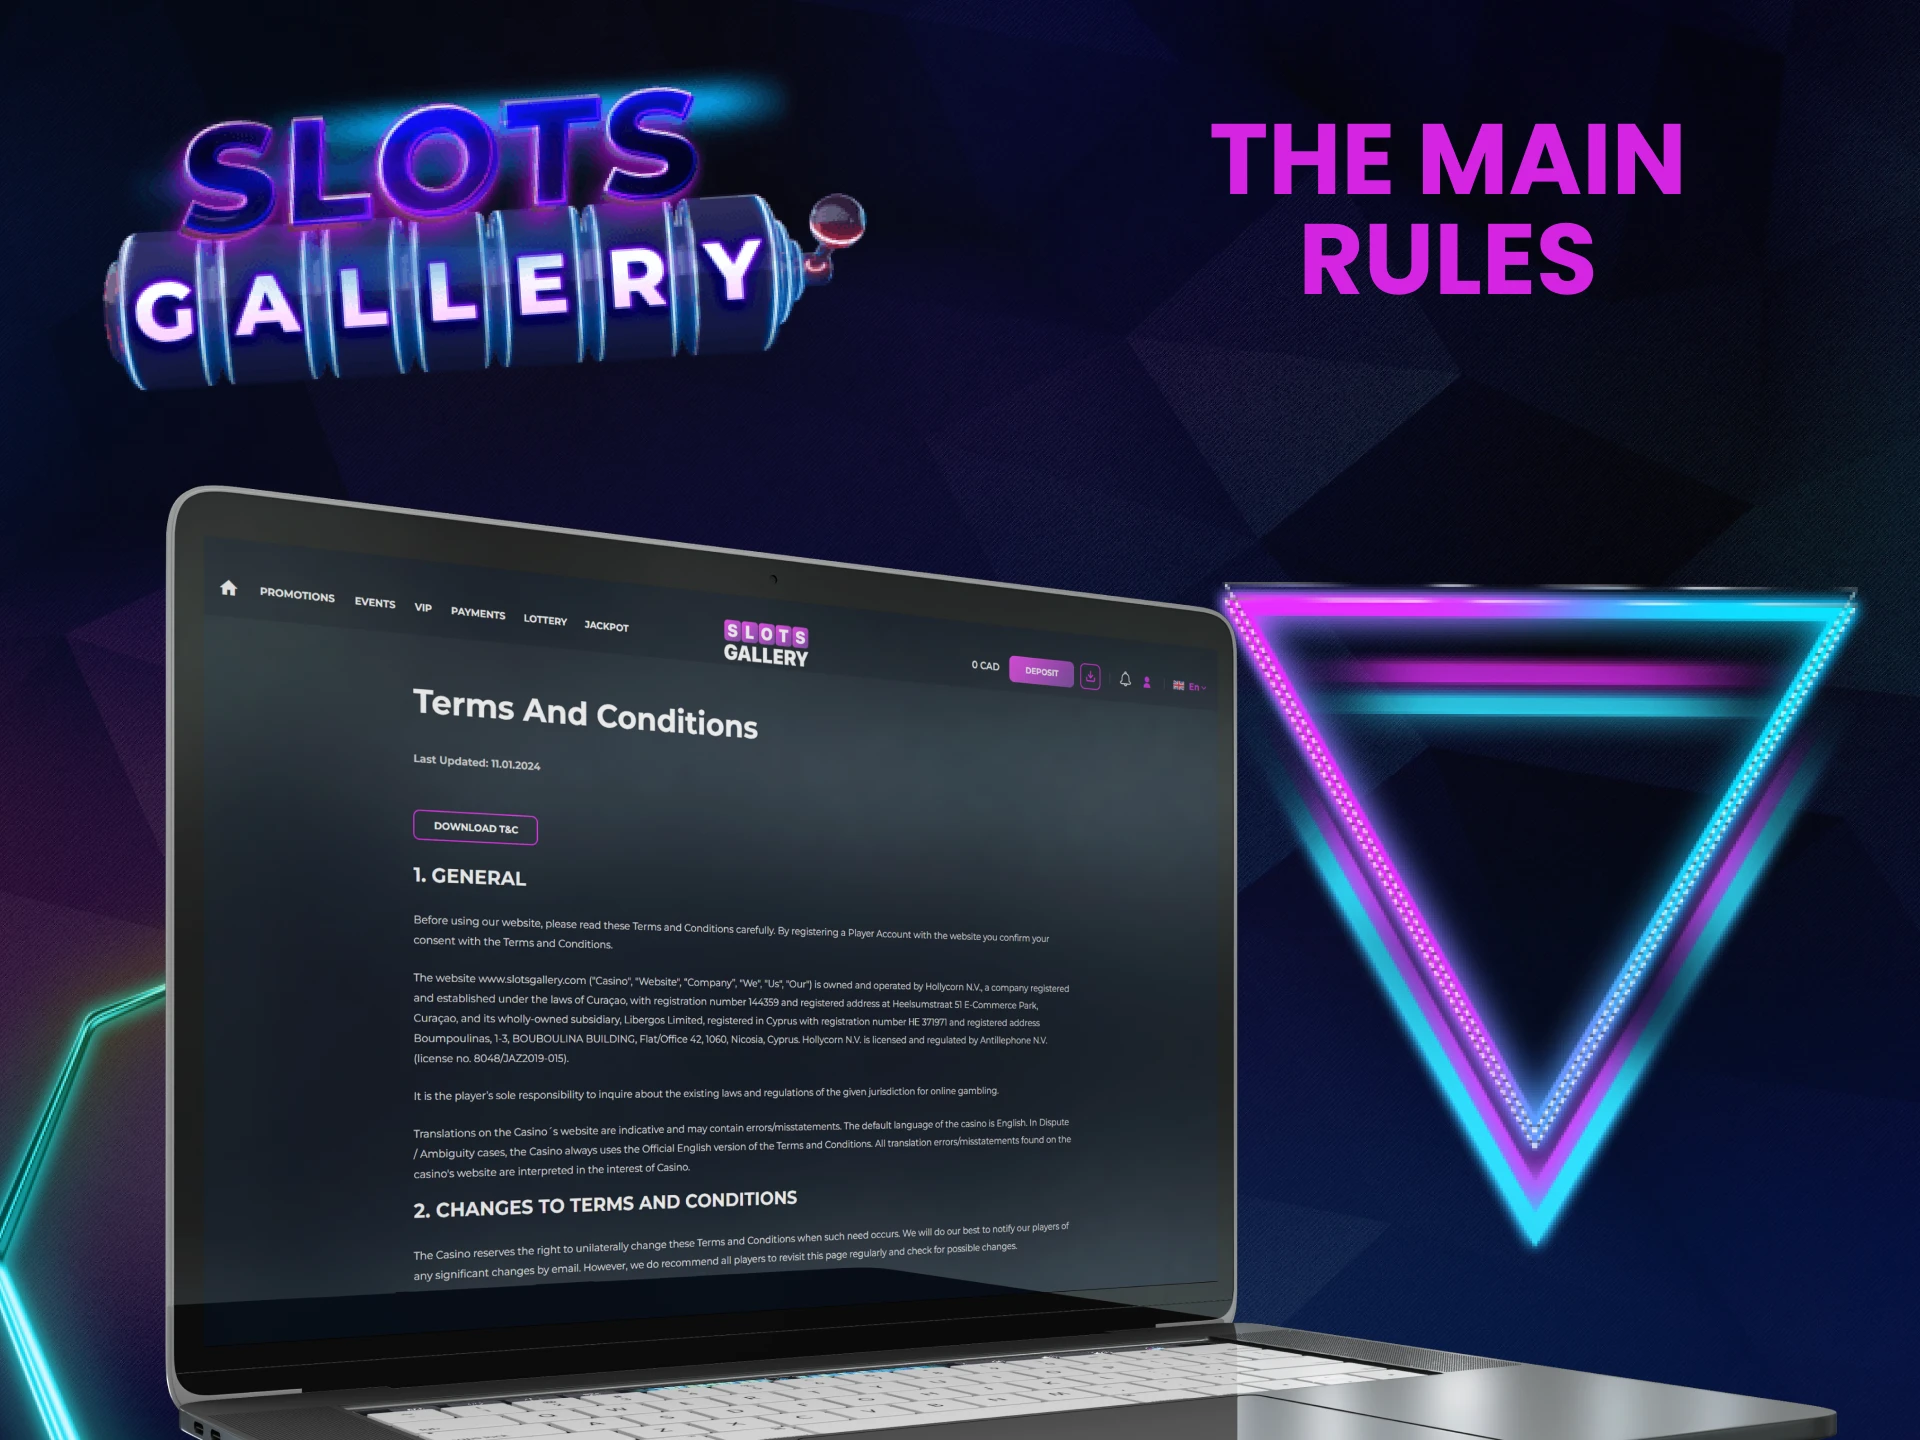 Be sure to read the rules for using the SlotsGallery website.